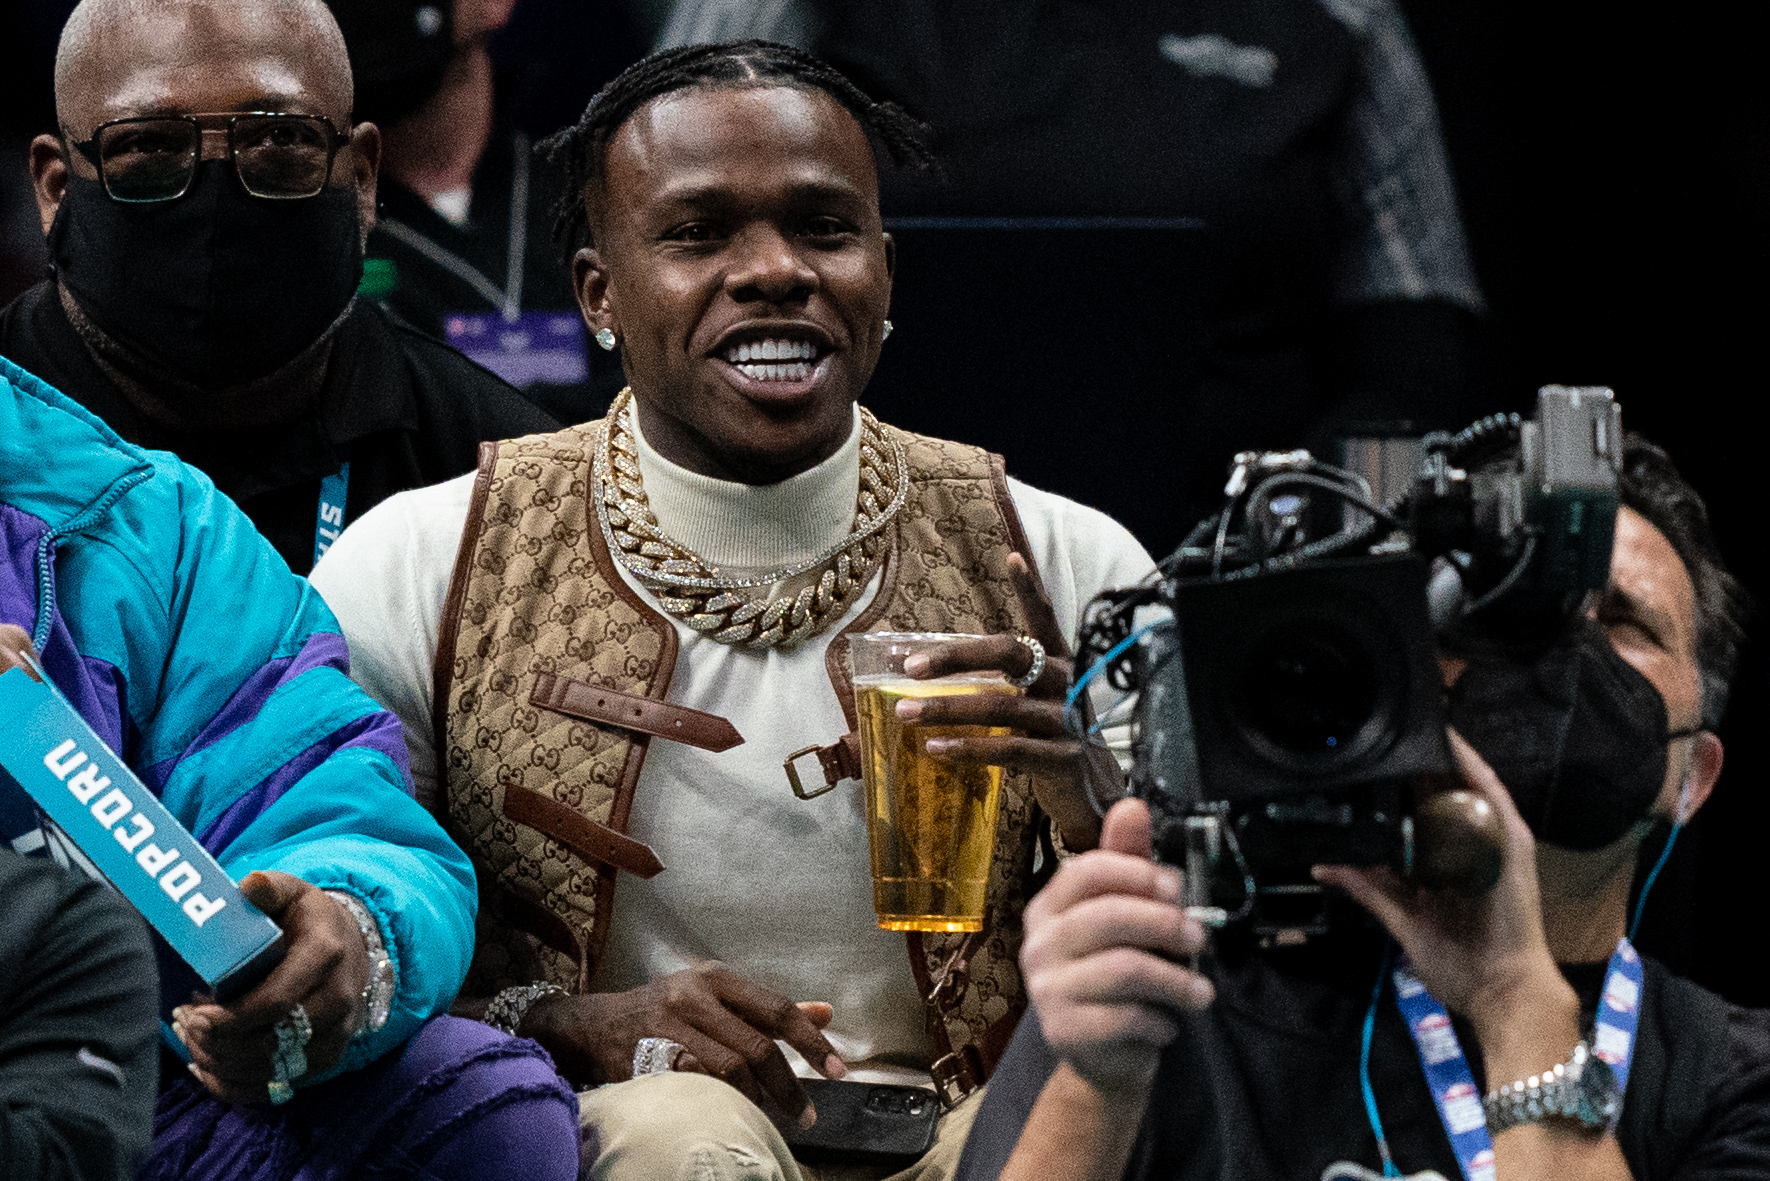 DaBaby Has Yet To Make A Donation To HIV/AIDS Organizations: Report